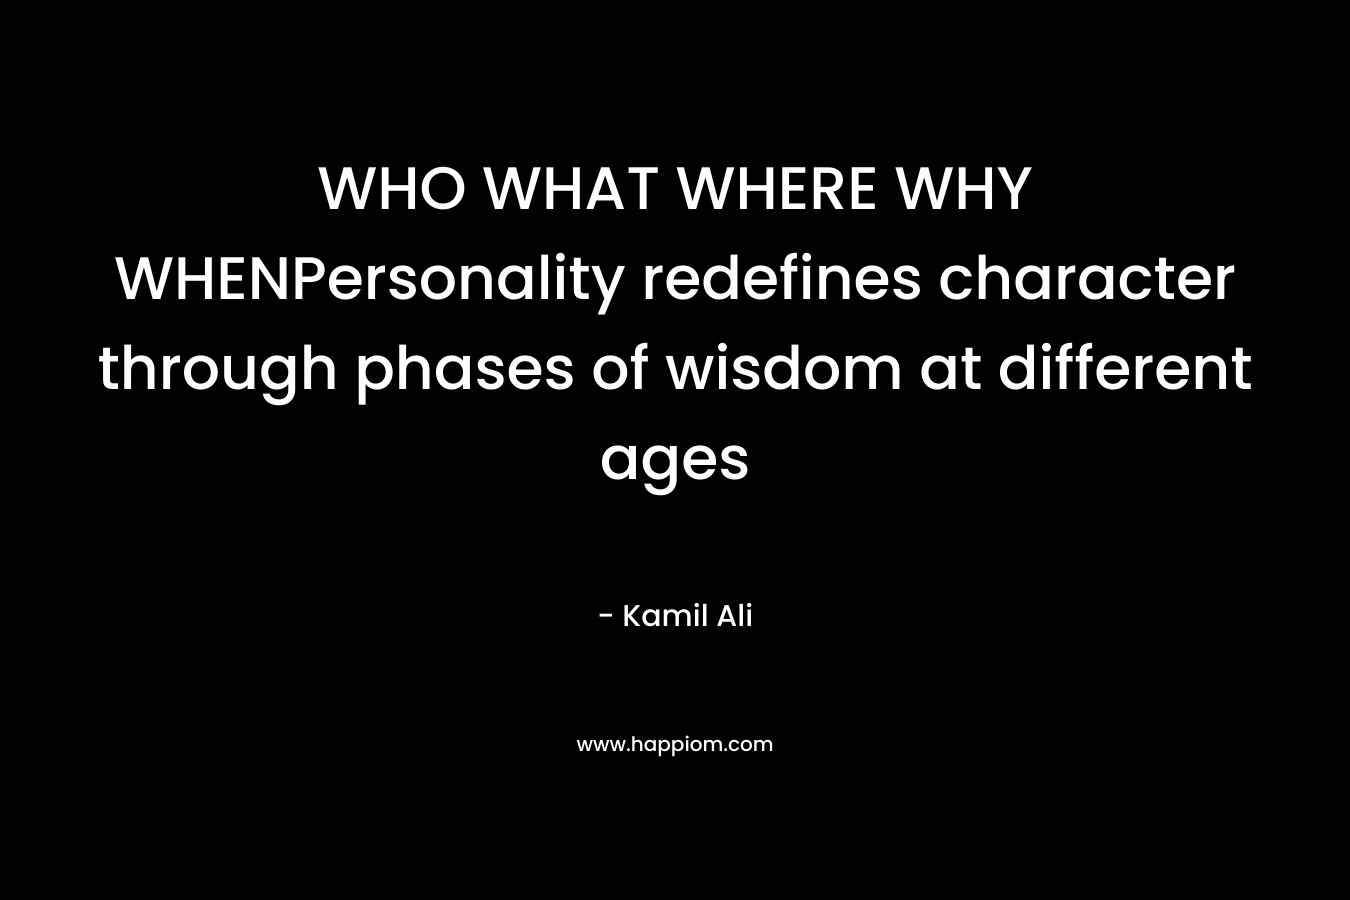 WHO WHAT WHERE WHY WHENPersonality redefines character through phases of wisdom at different ages – Kamil Ali